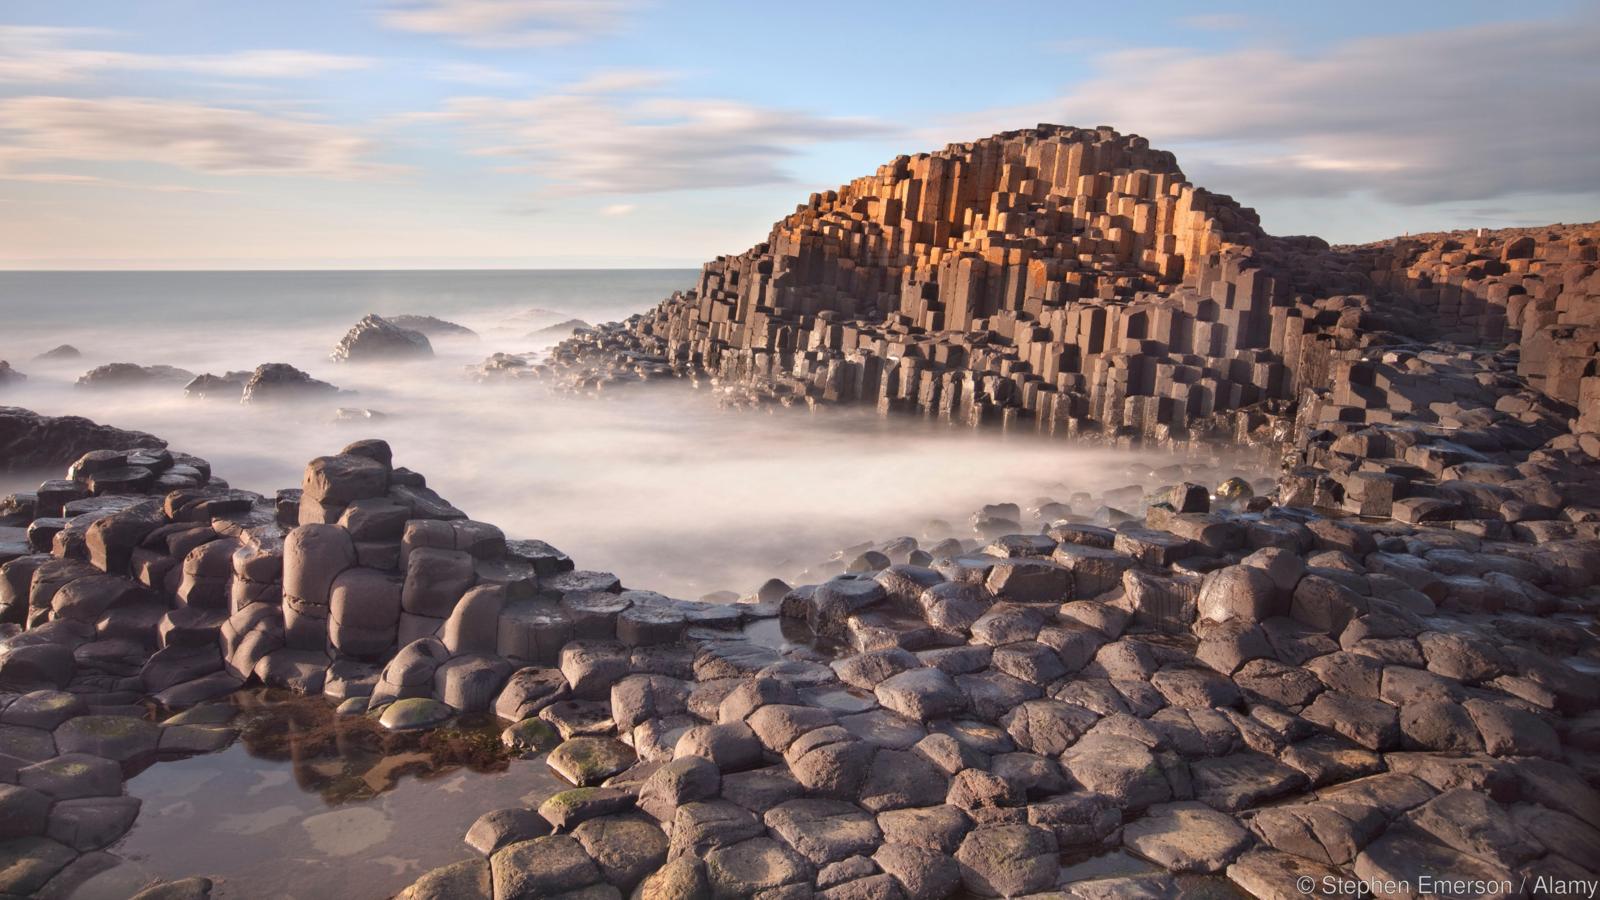 Giants causeway captured in the evening.